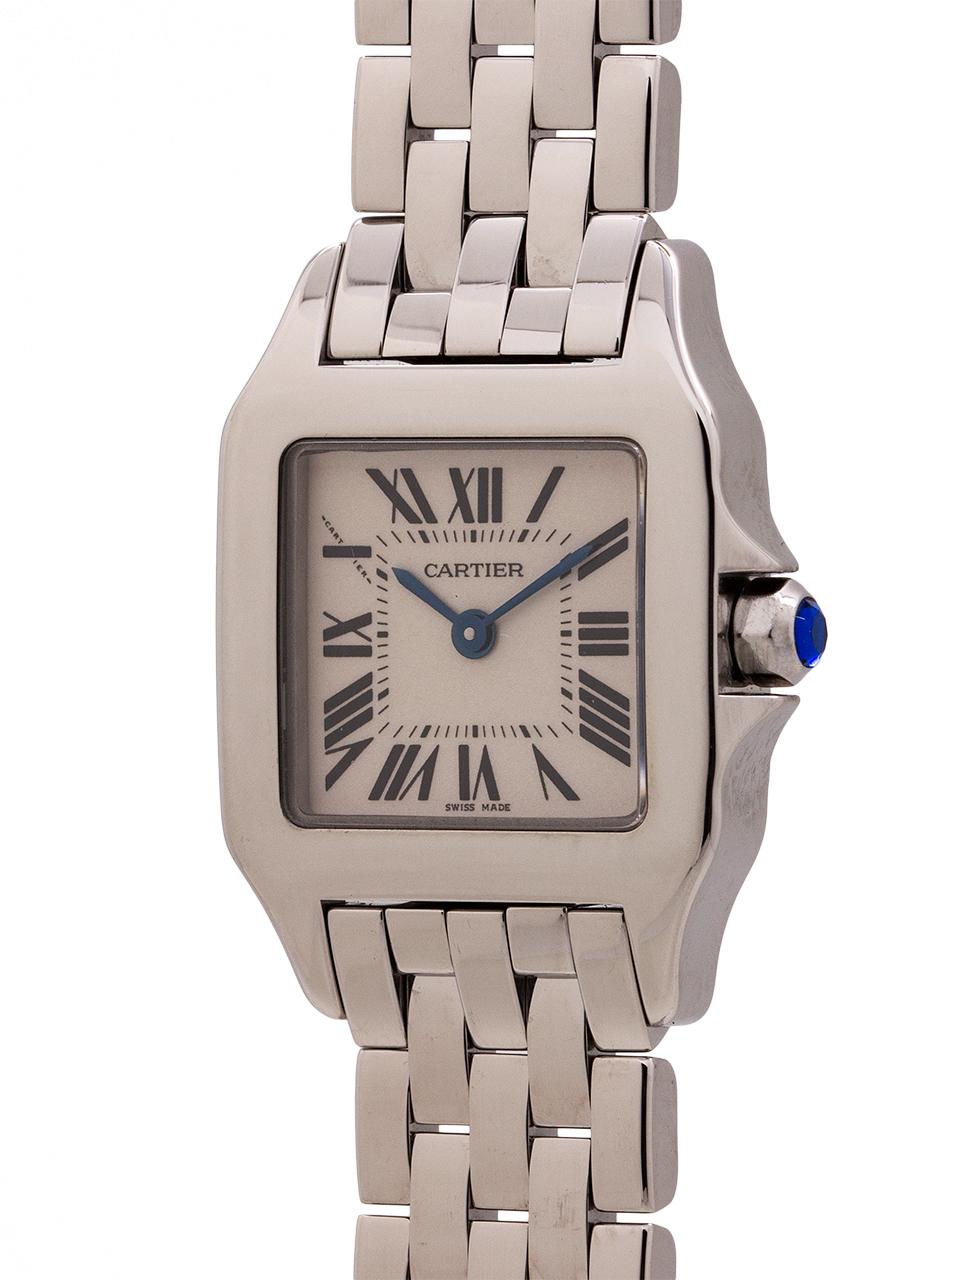 
Cartier stainless steel Demoiselle, circa 2000’s. 20mm case with sapphire crystal and blue sapphire cabochon crown. Classic antique white dial with Roman numerals and blue steel hands. Powered by battery quartz movement. Cartier flat link bracelet